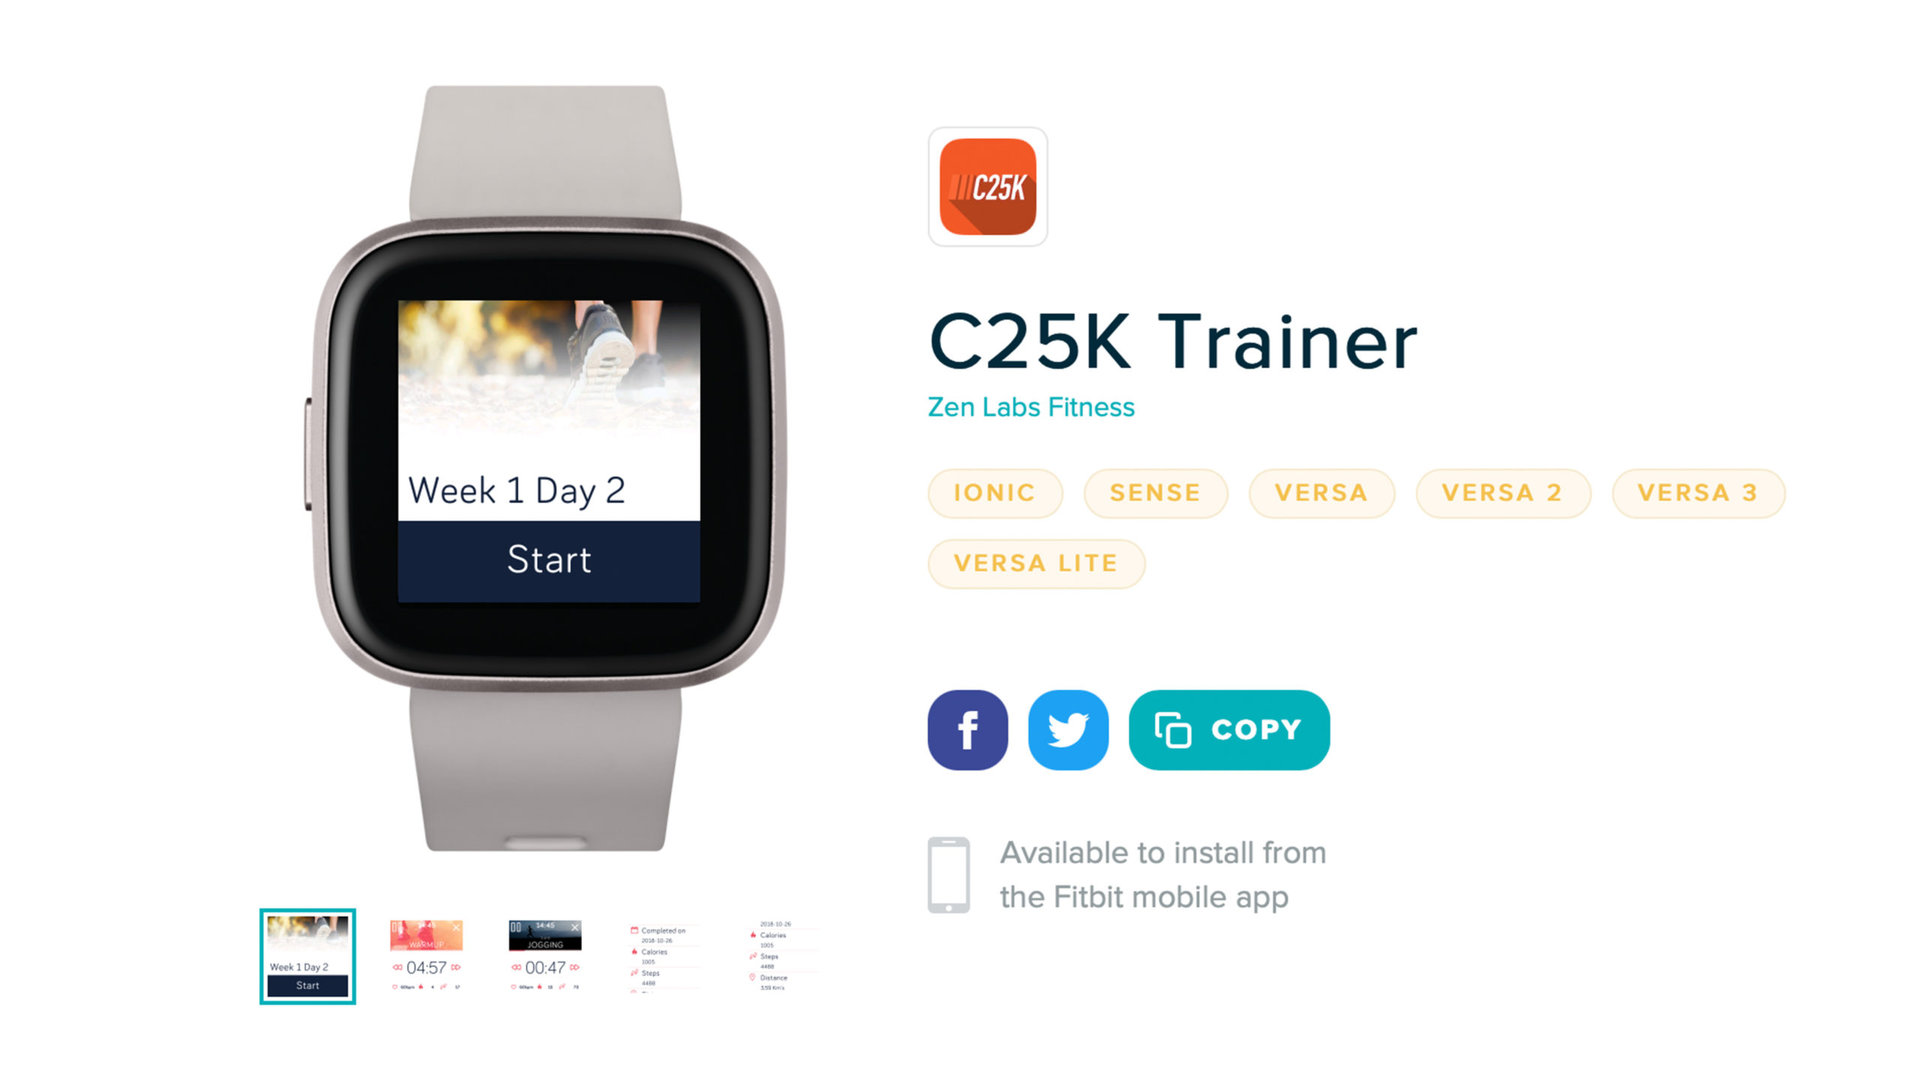 Information for the C25K Trainer app for Fitbit.